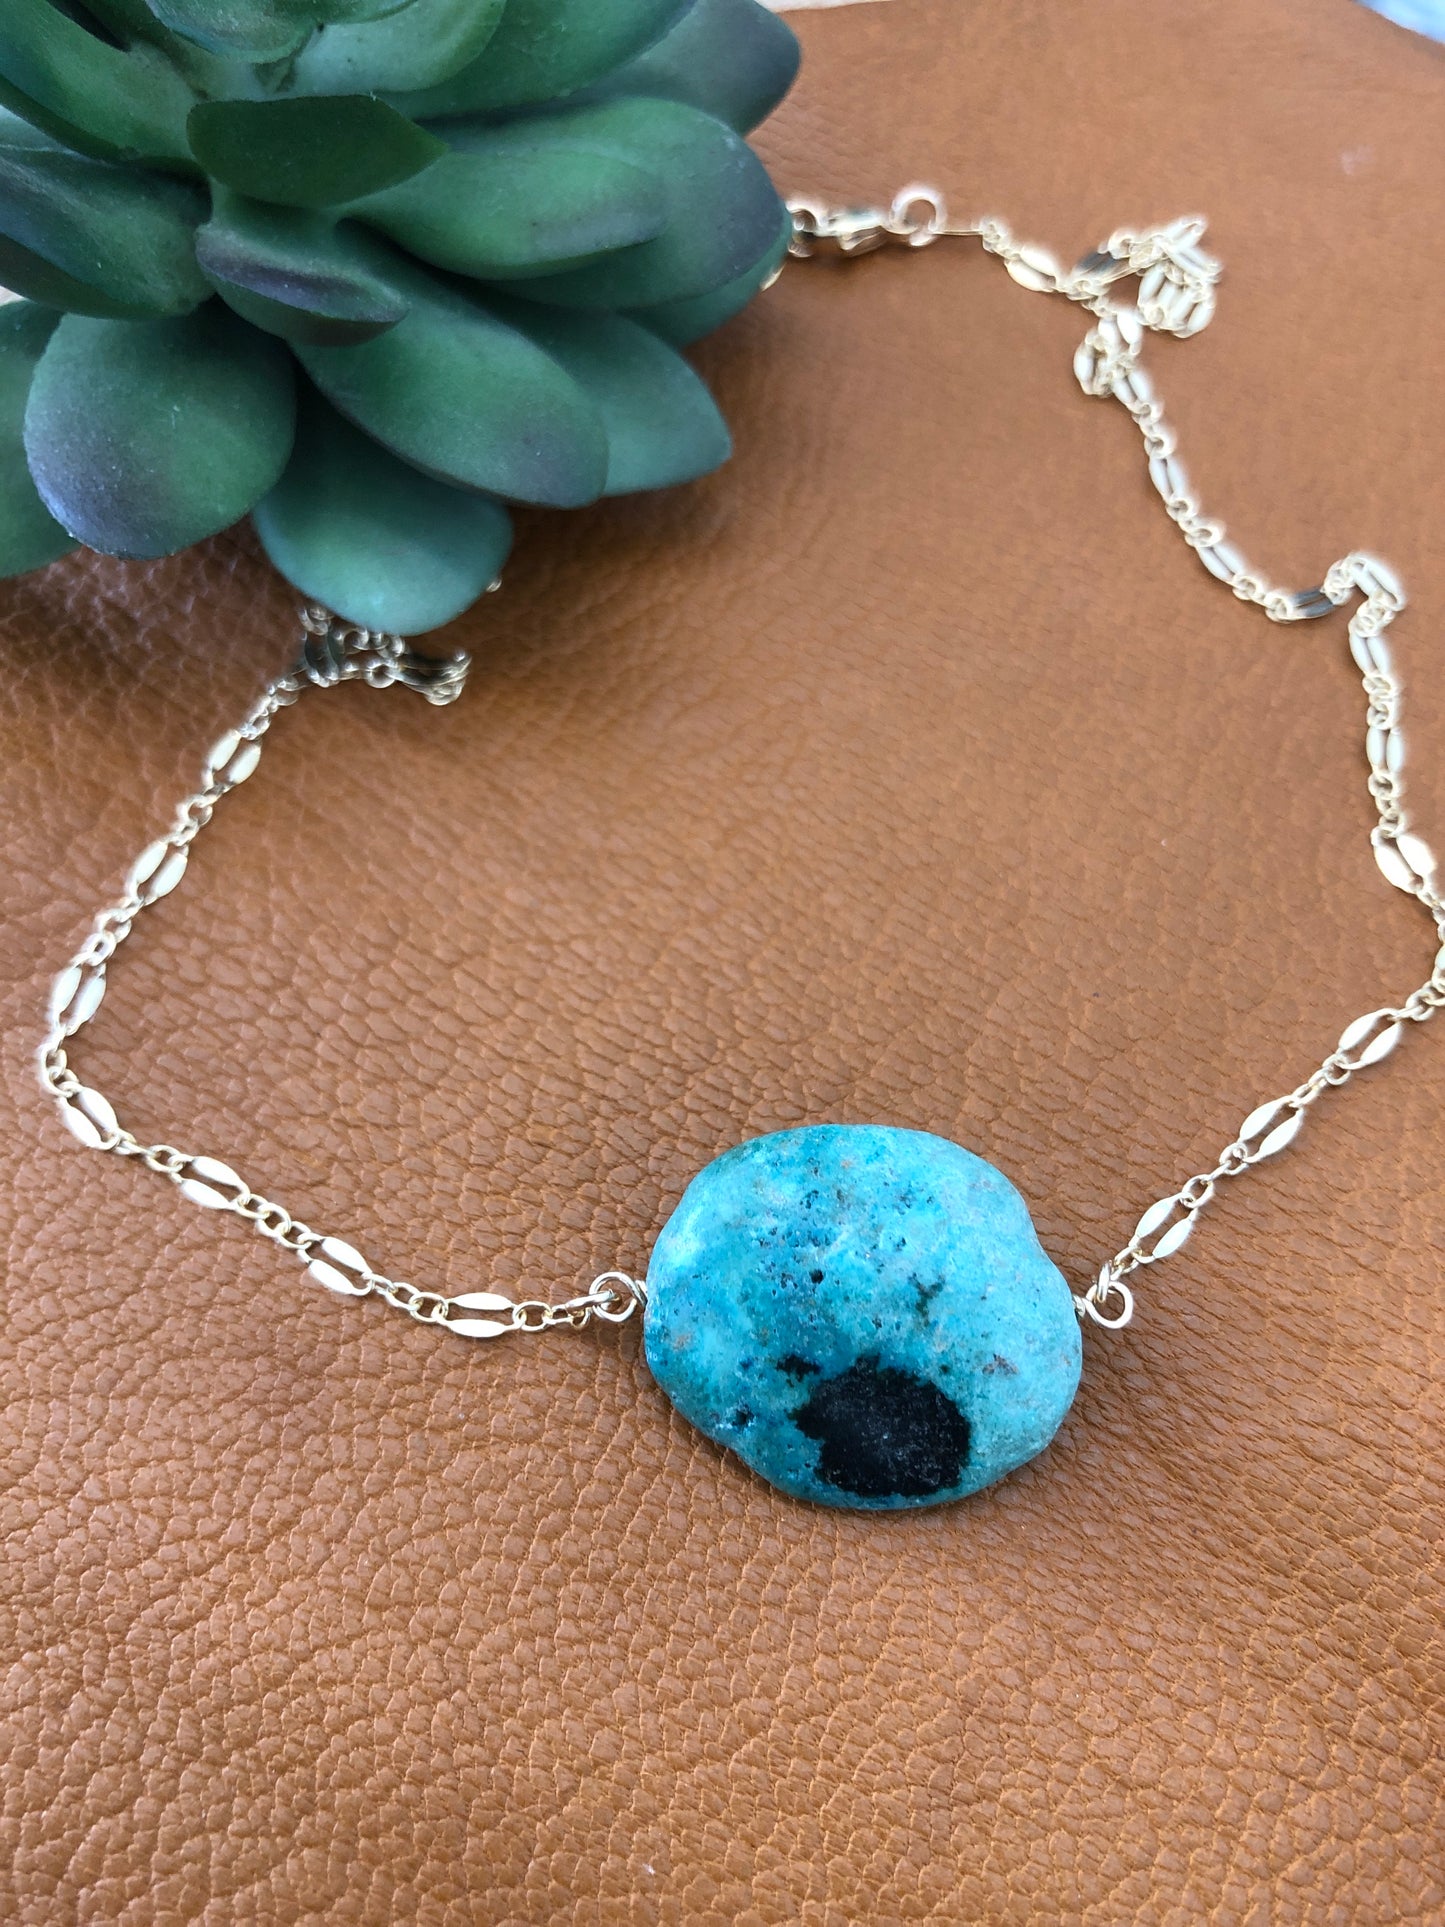 A 14k gold filled 18" lace necklace with a turquoise gemstone lays on a brown leather piece.